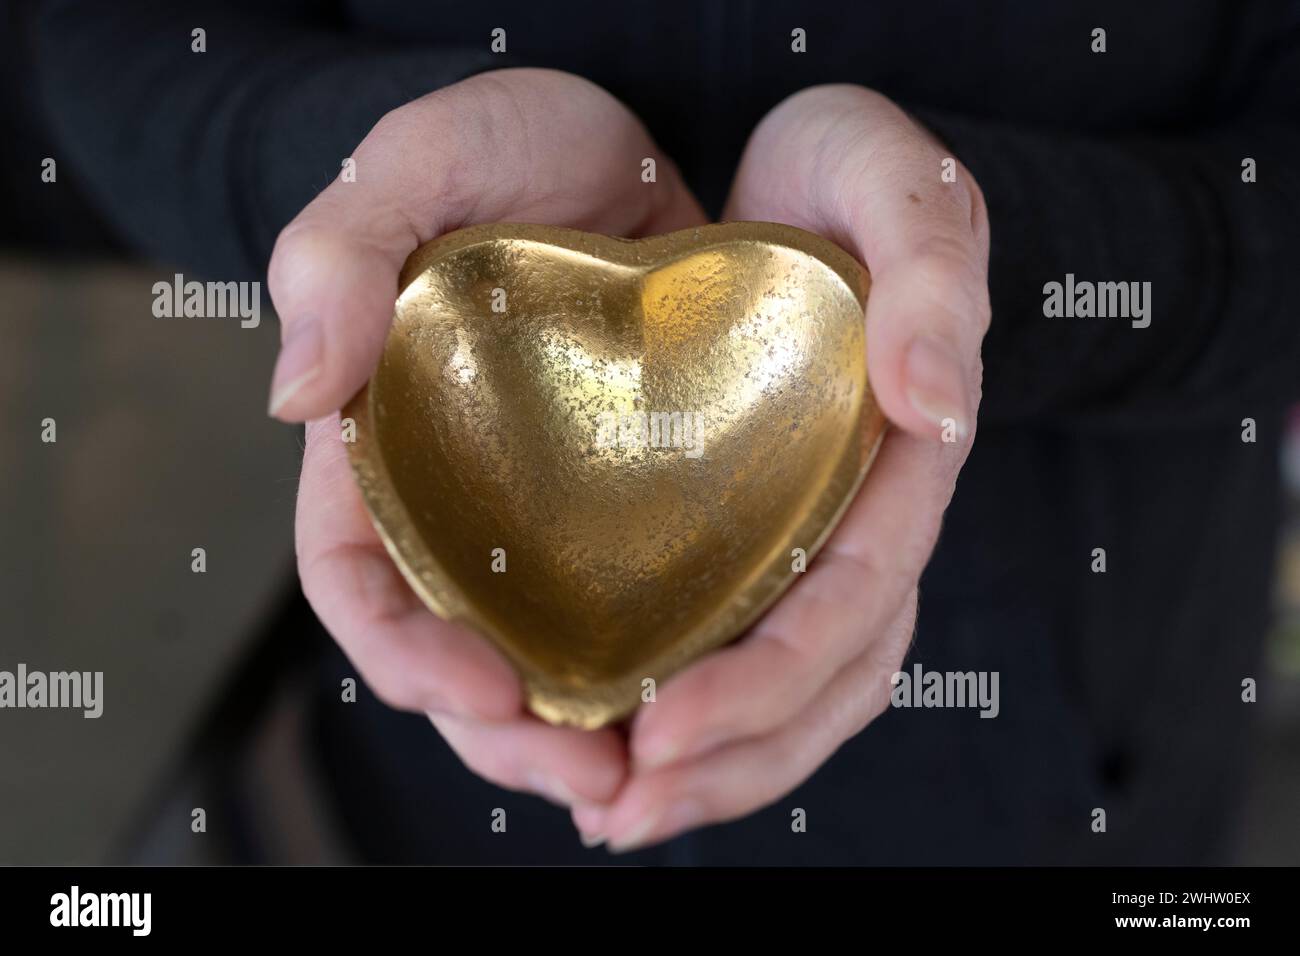 A person holds a heart-shaped metal object Stock Photo